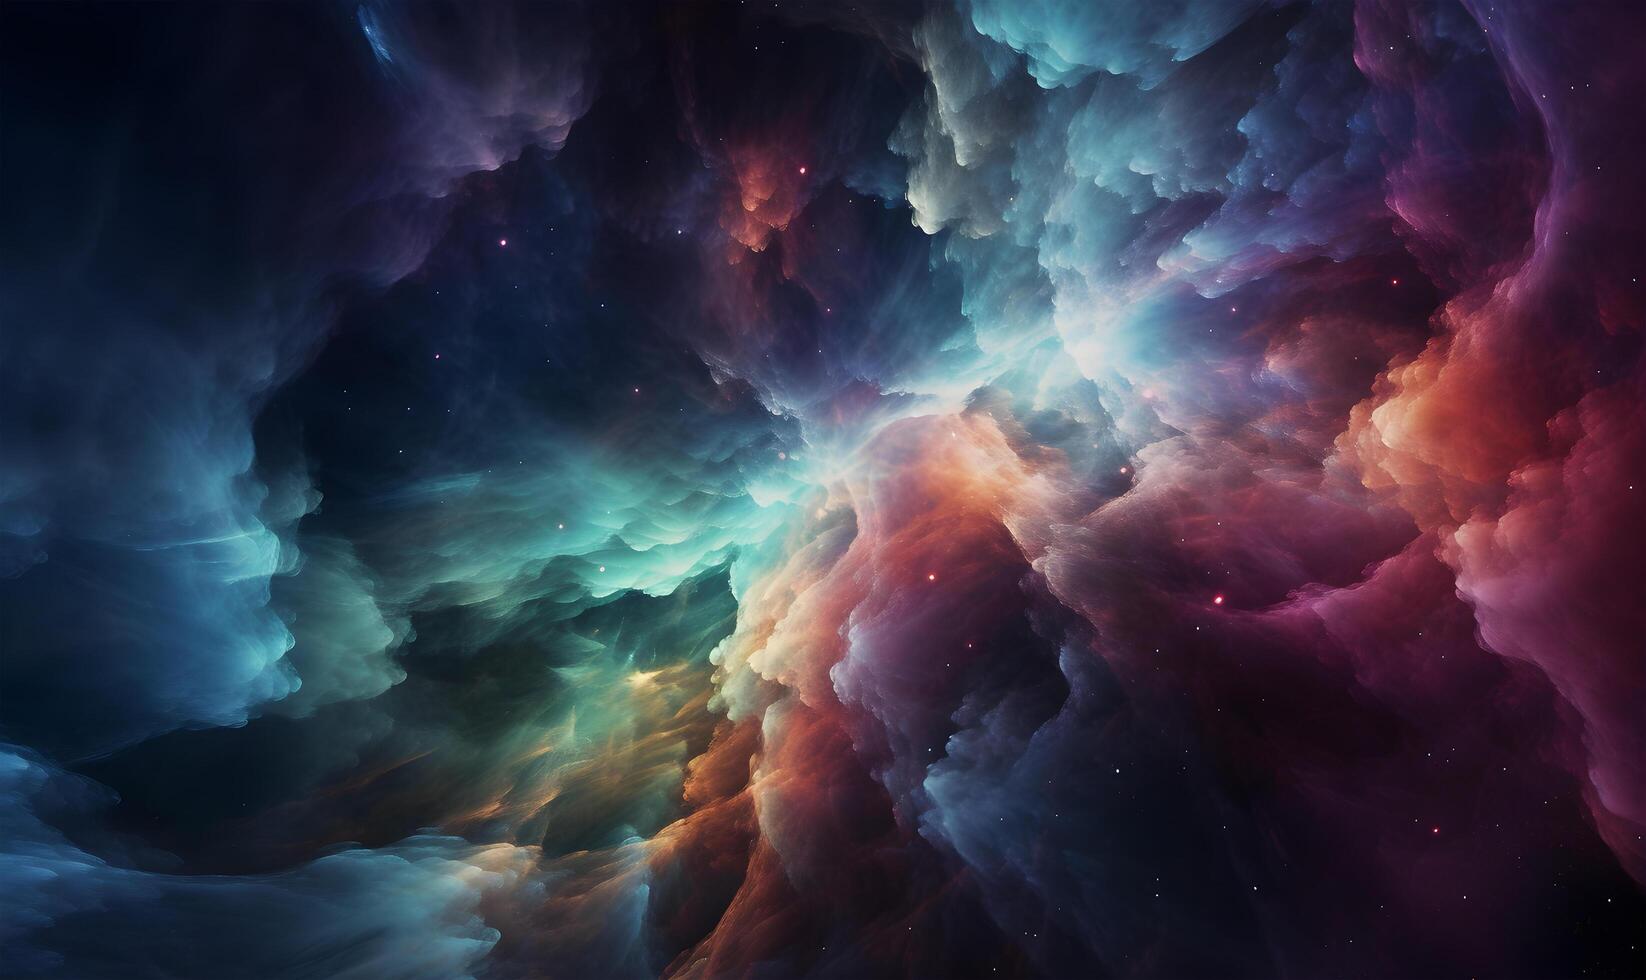 Abstract Space themed background featuring a colorful nebula or supernova, with vibrant swirls of gas and dust. photo